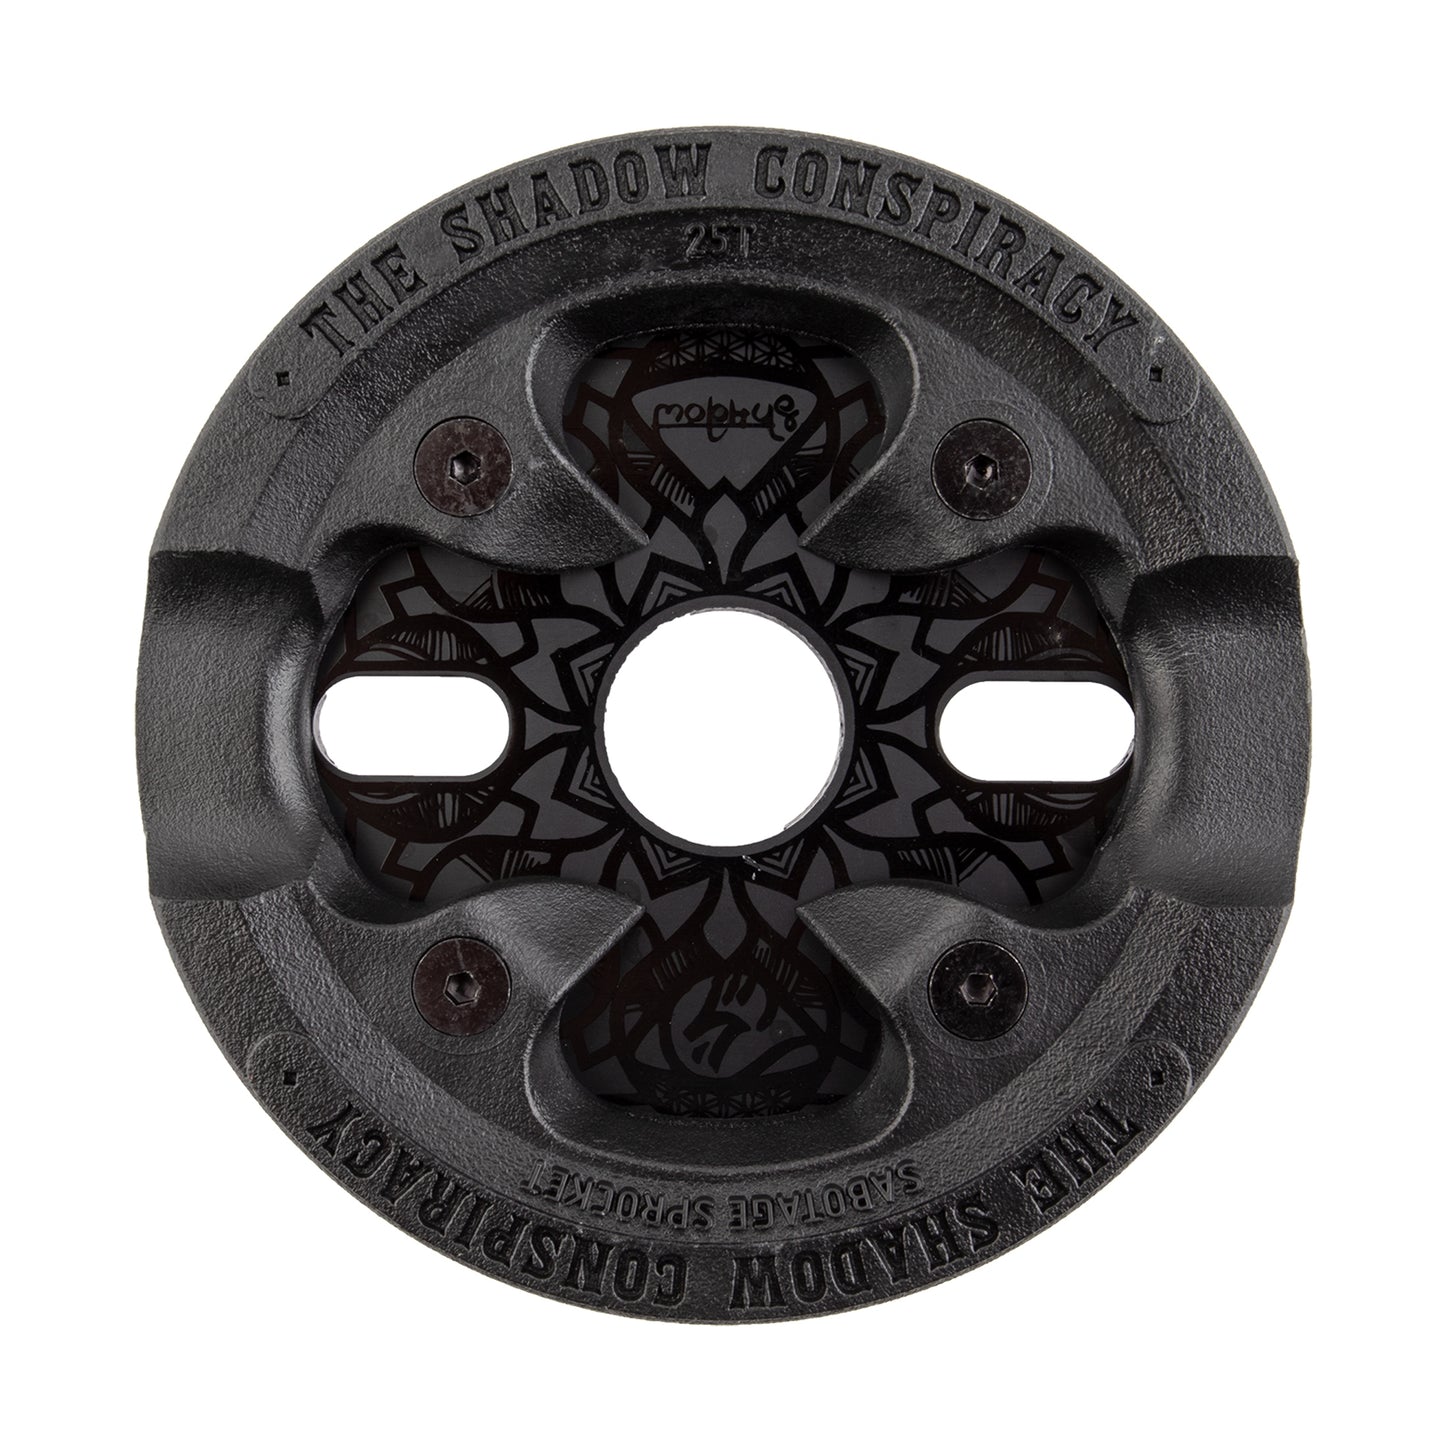 The Shadow Conspiracy Chainring Sprocket Sabotage